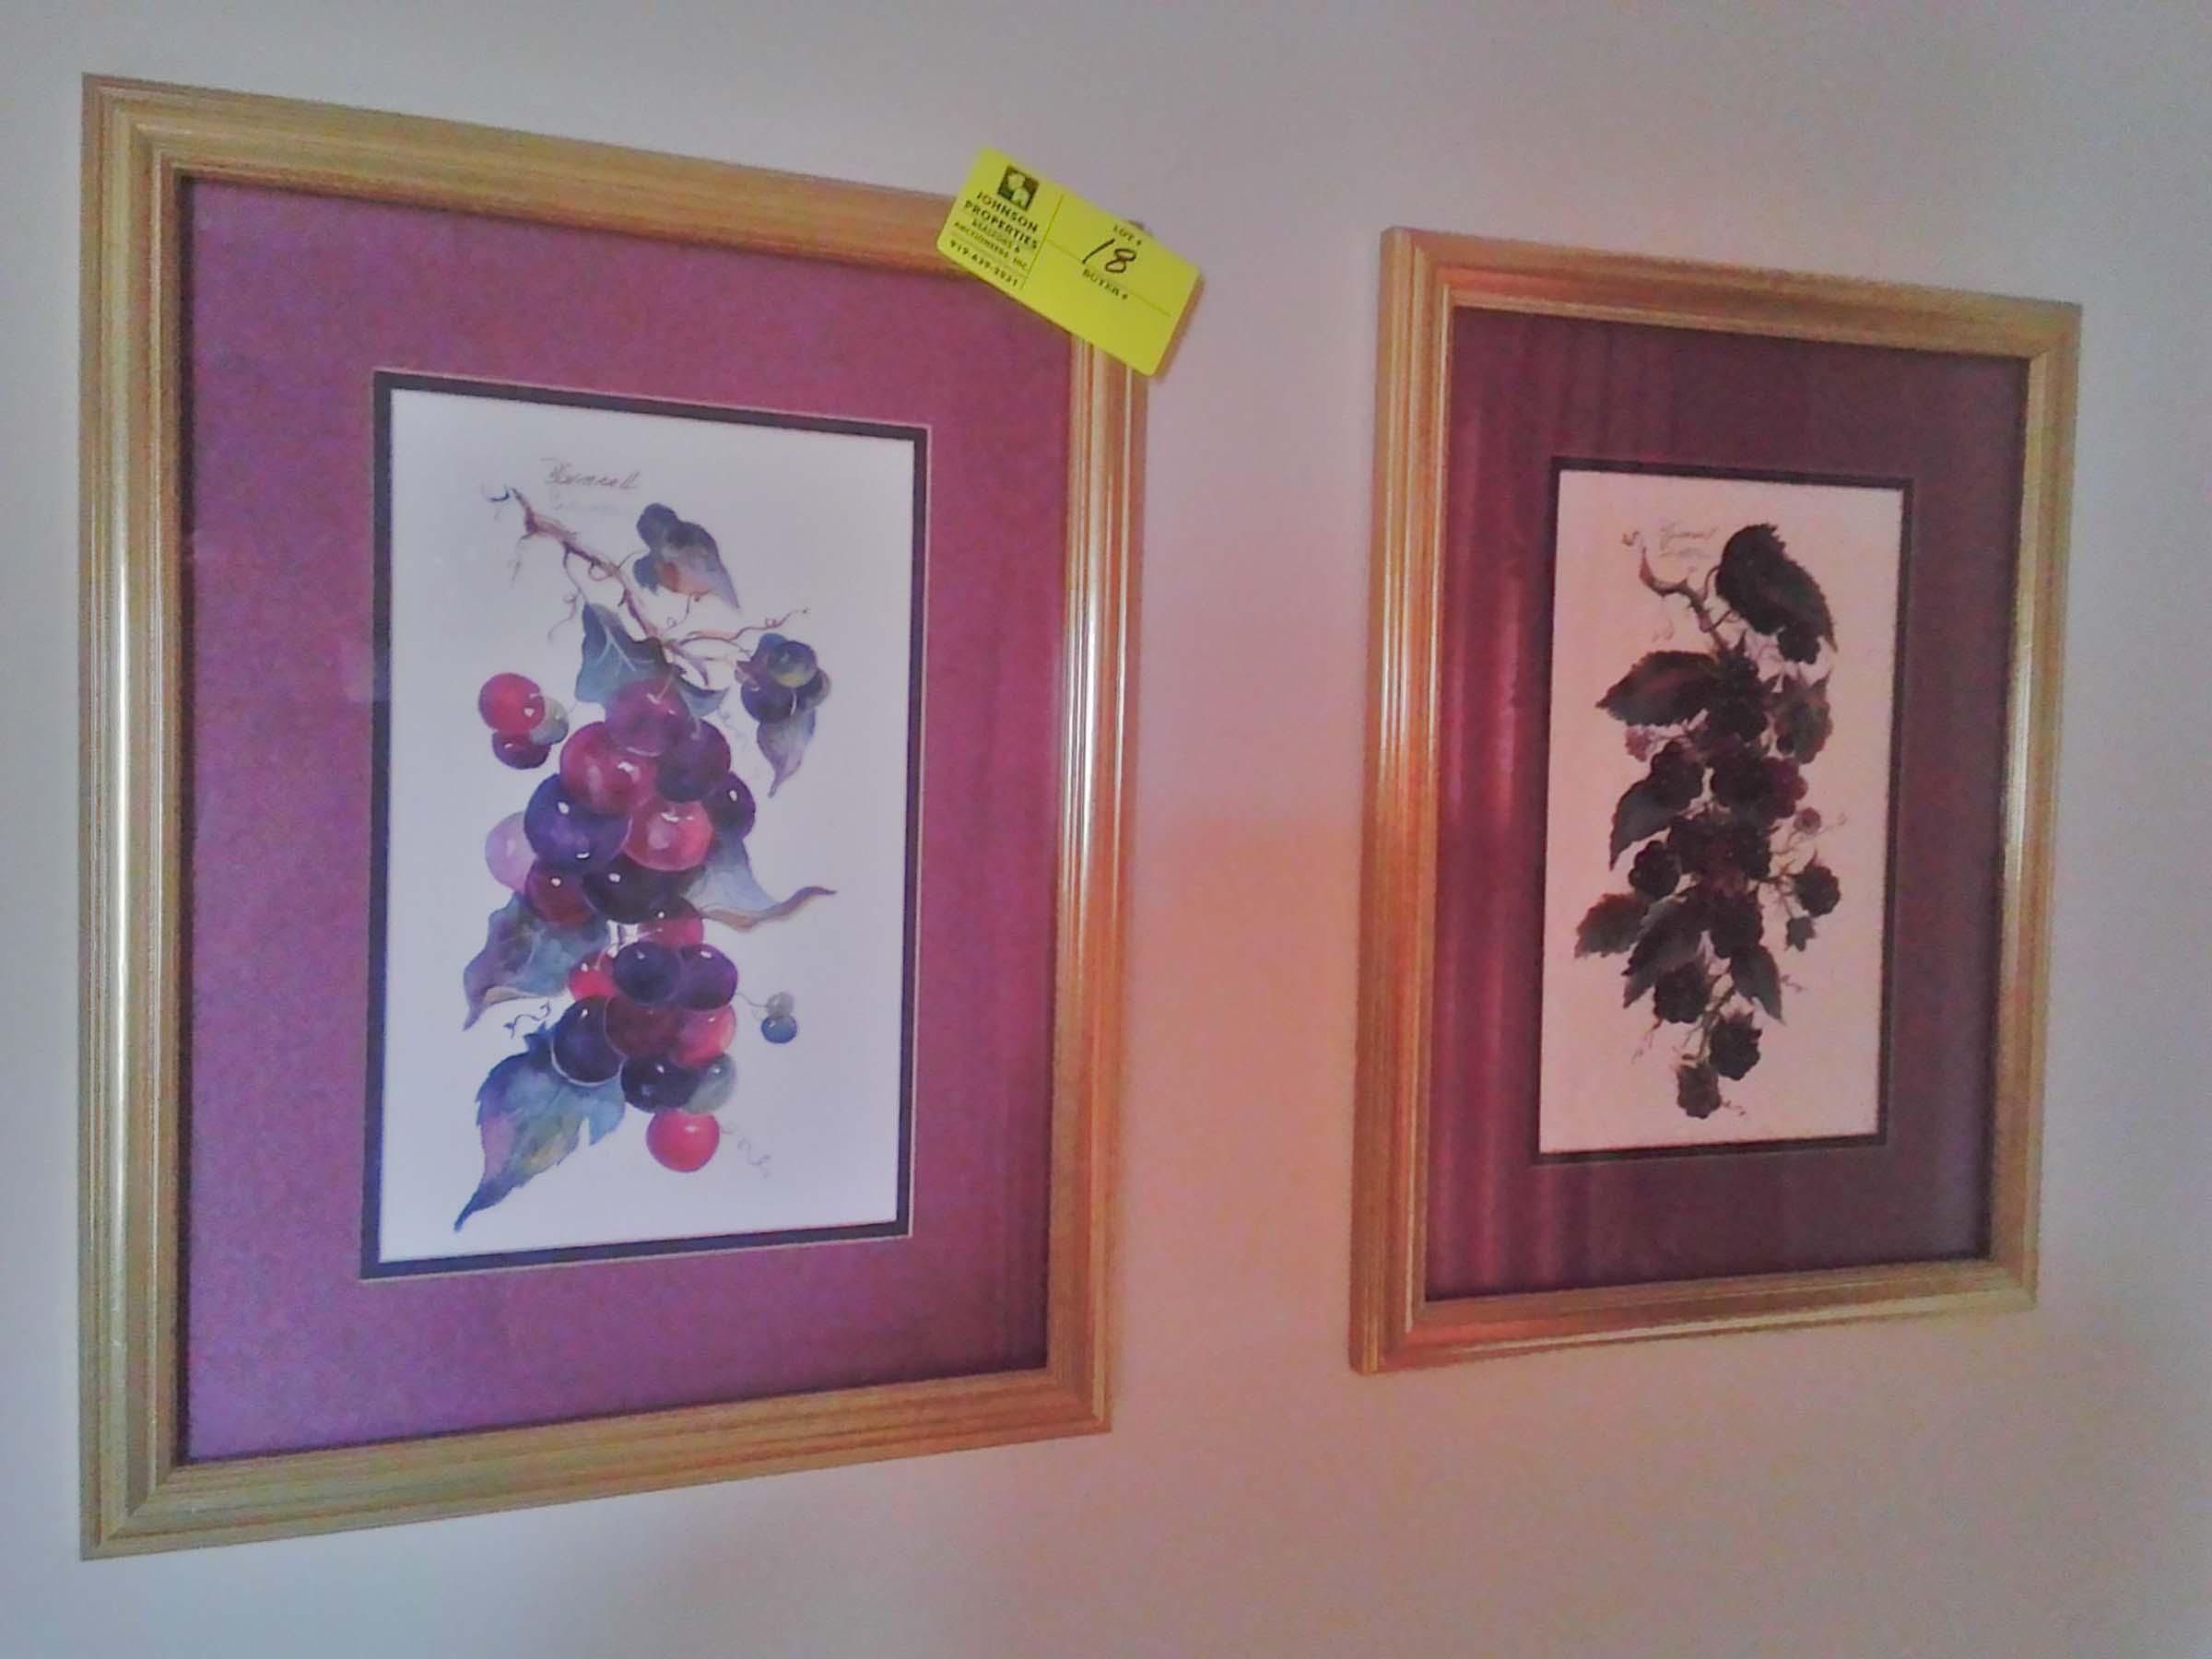 Pair of Prints by B. Sumroll, Signed, Still Life Blackberries and Grapes, Purple Matting, 20" x 15"